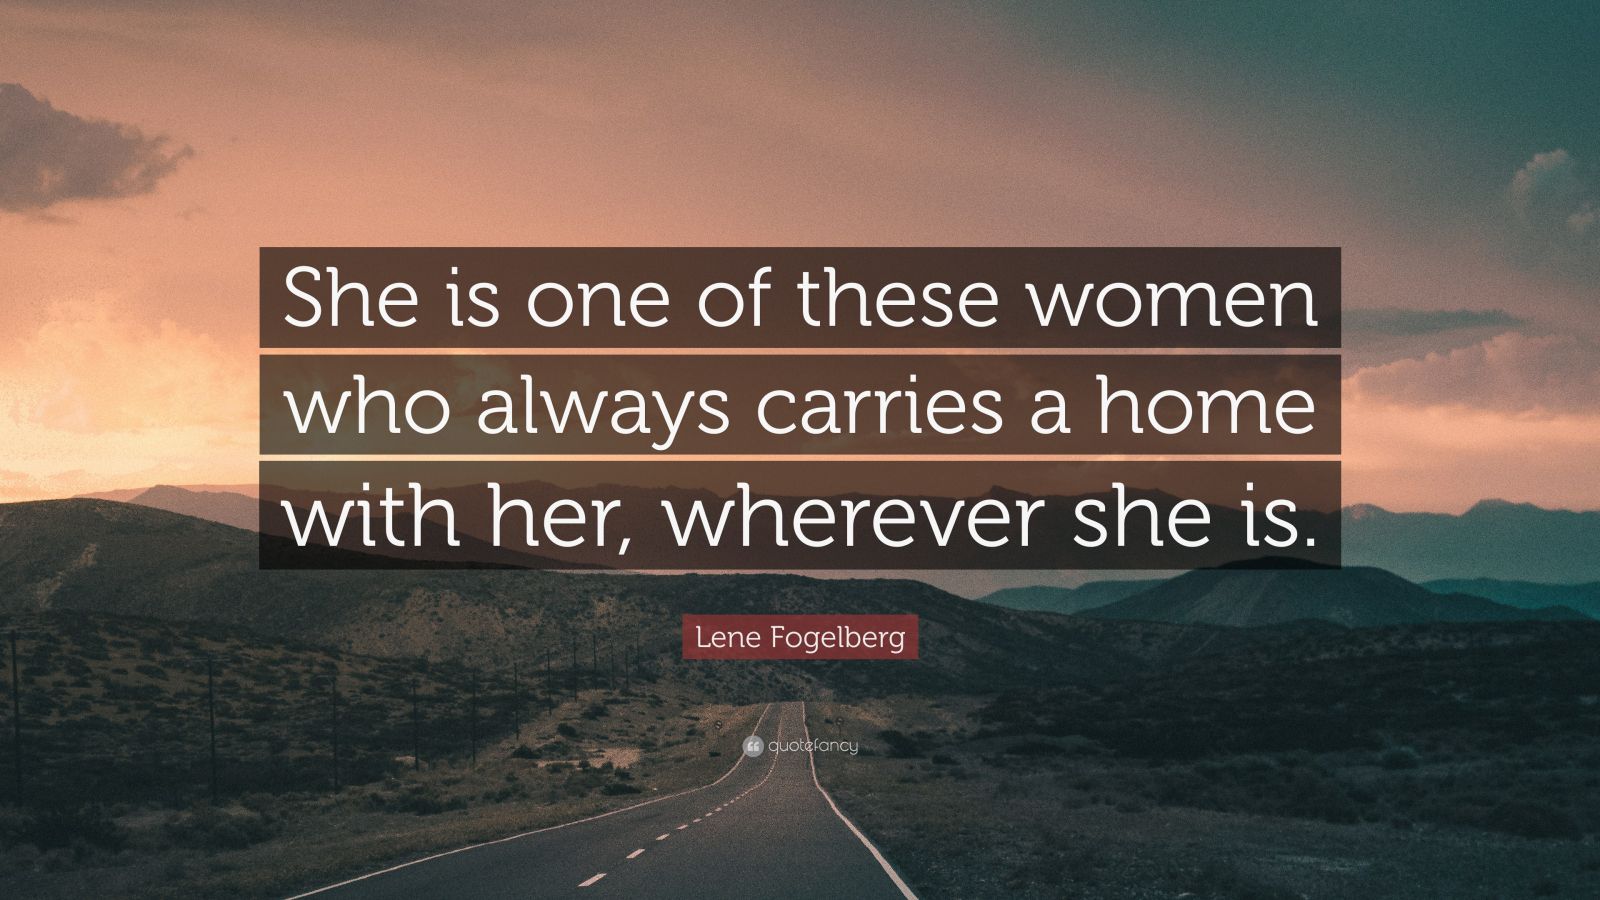 Lene Fogelberg Quote: “She is one of these women who always carries a ...